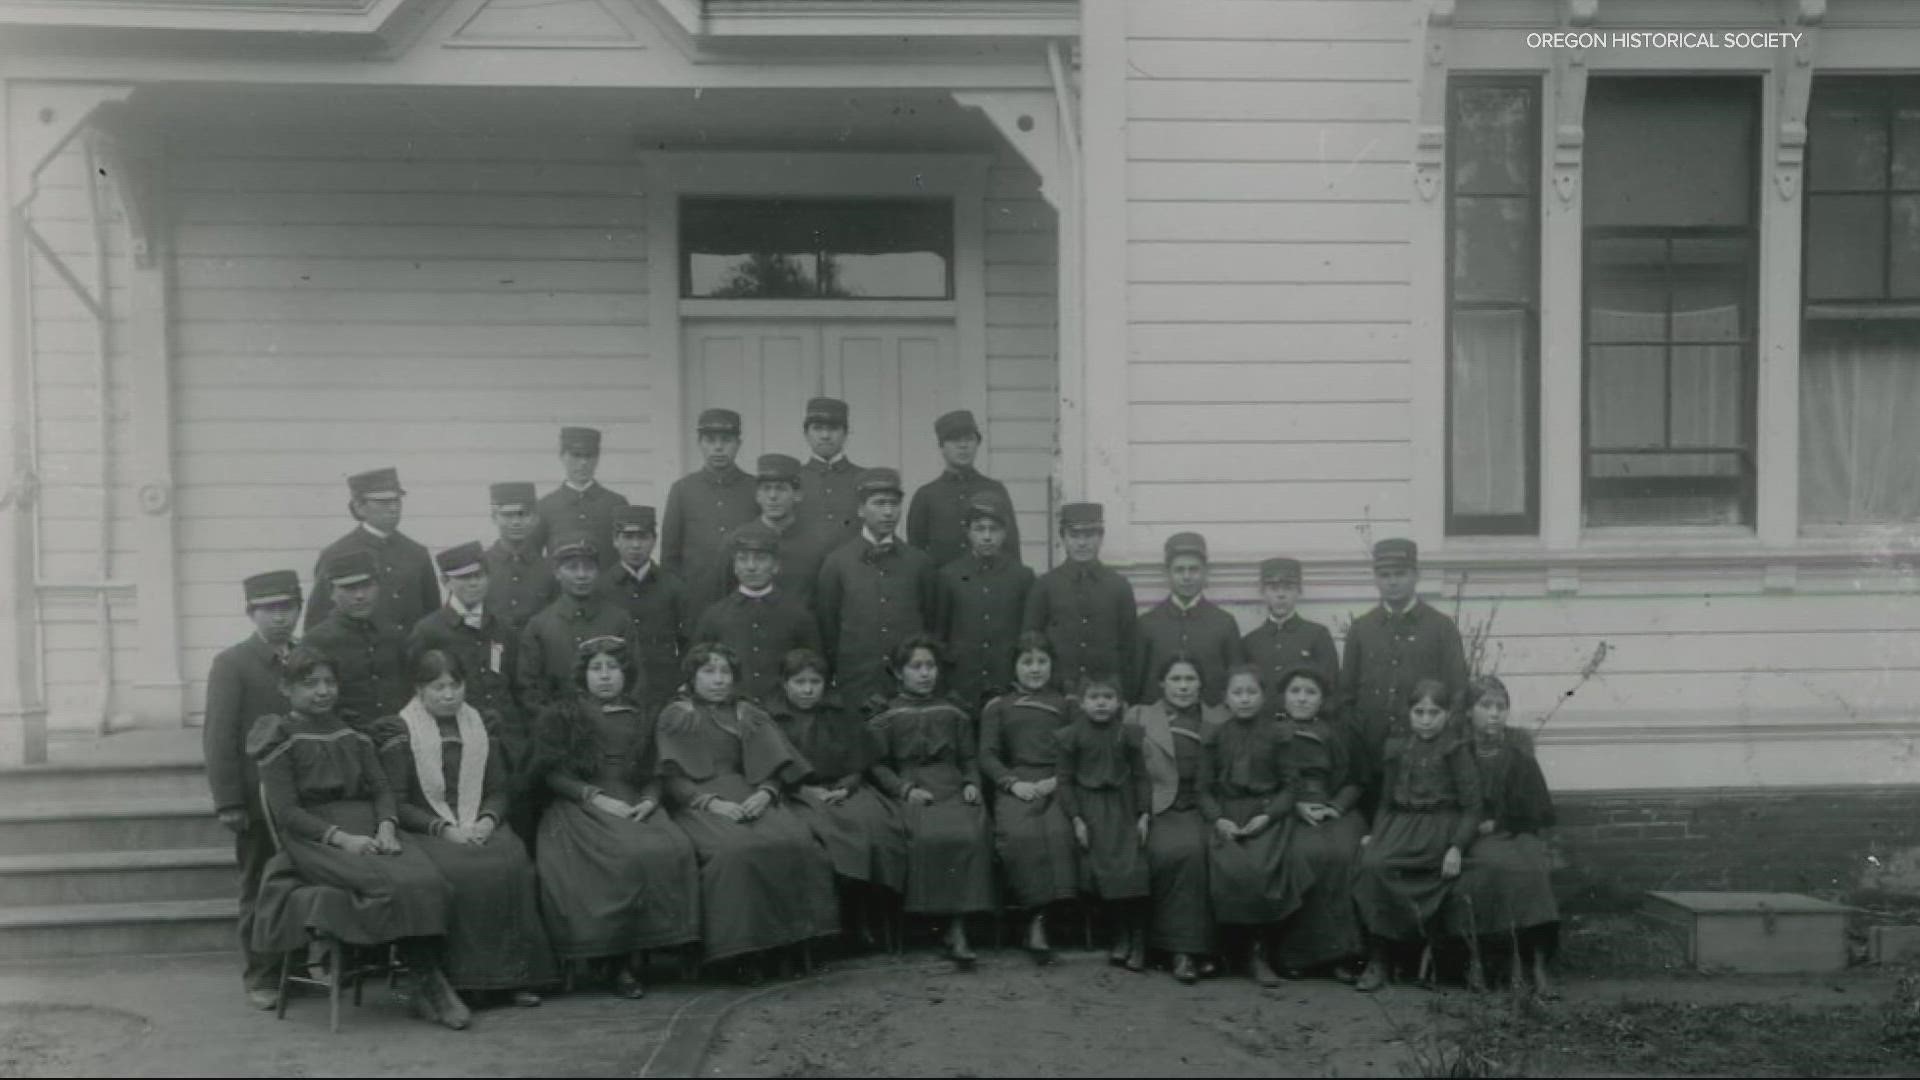 For many Native people, Indian boarding schools remain a dark, hidden history. Some of that history can be traced to the Willamette Valley.